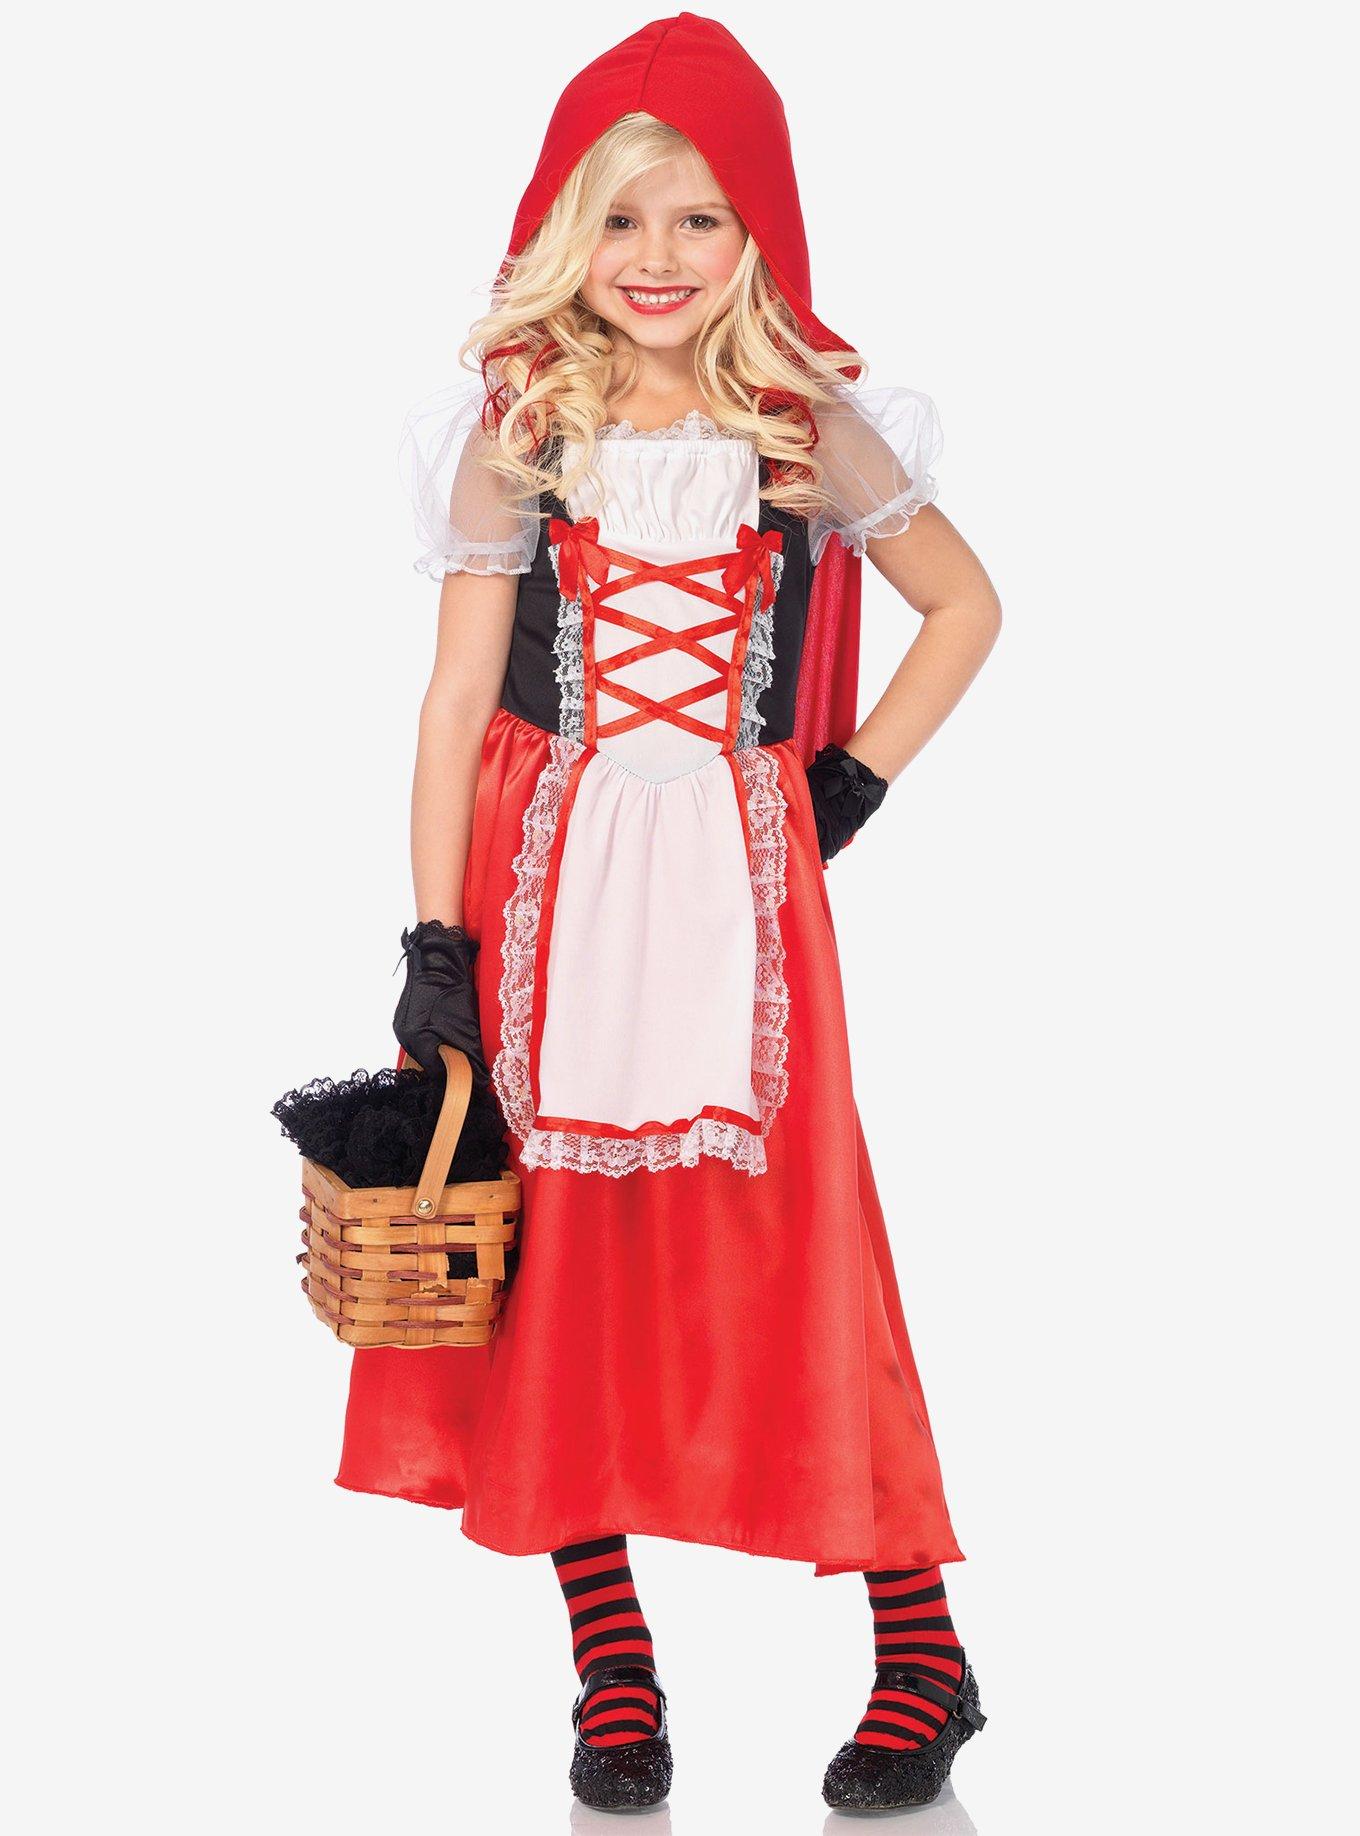 Red Riding Hood Costume, MULTICOLOR, hi-res